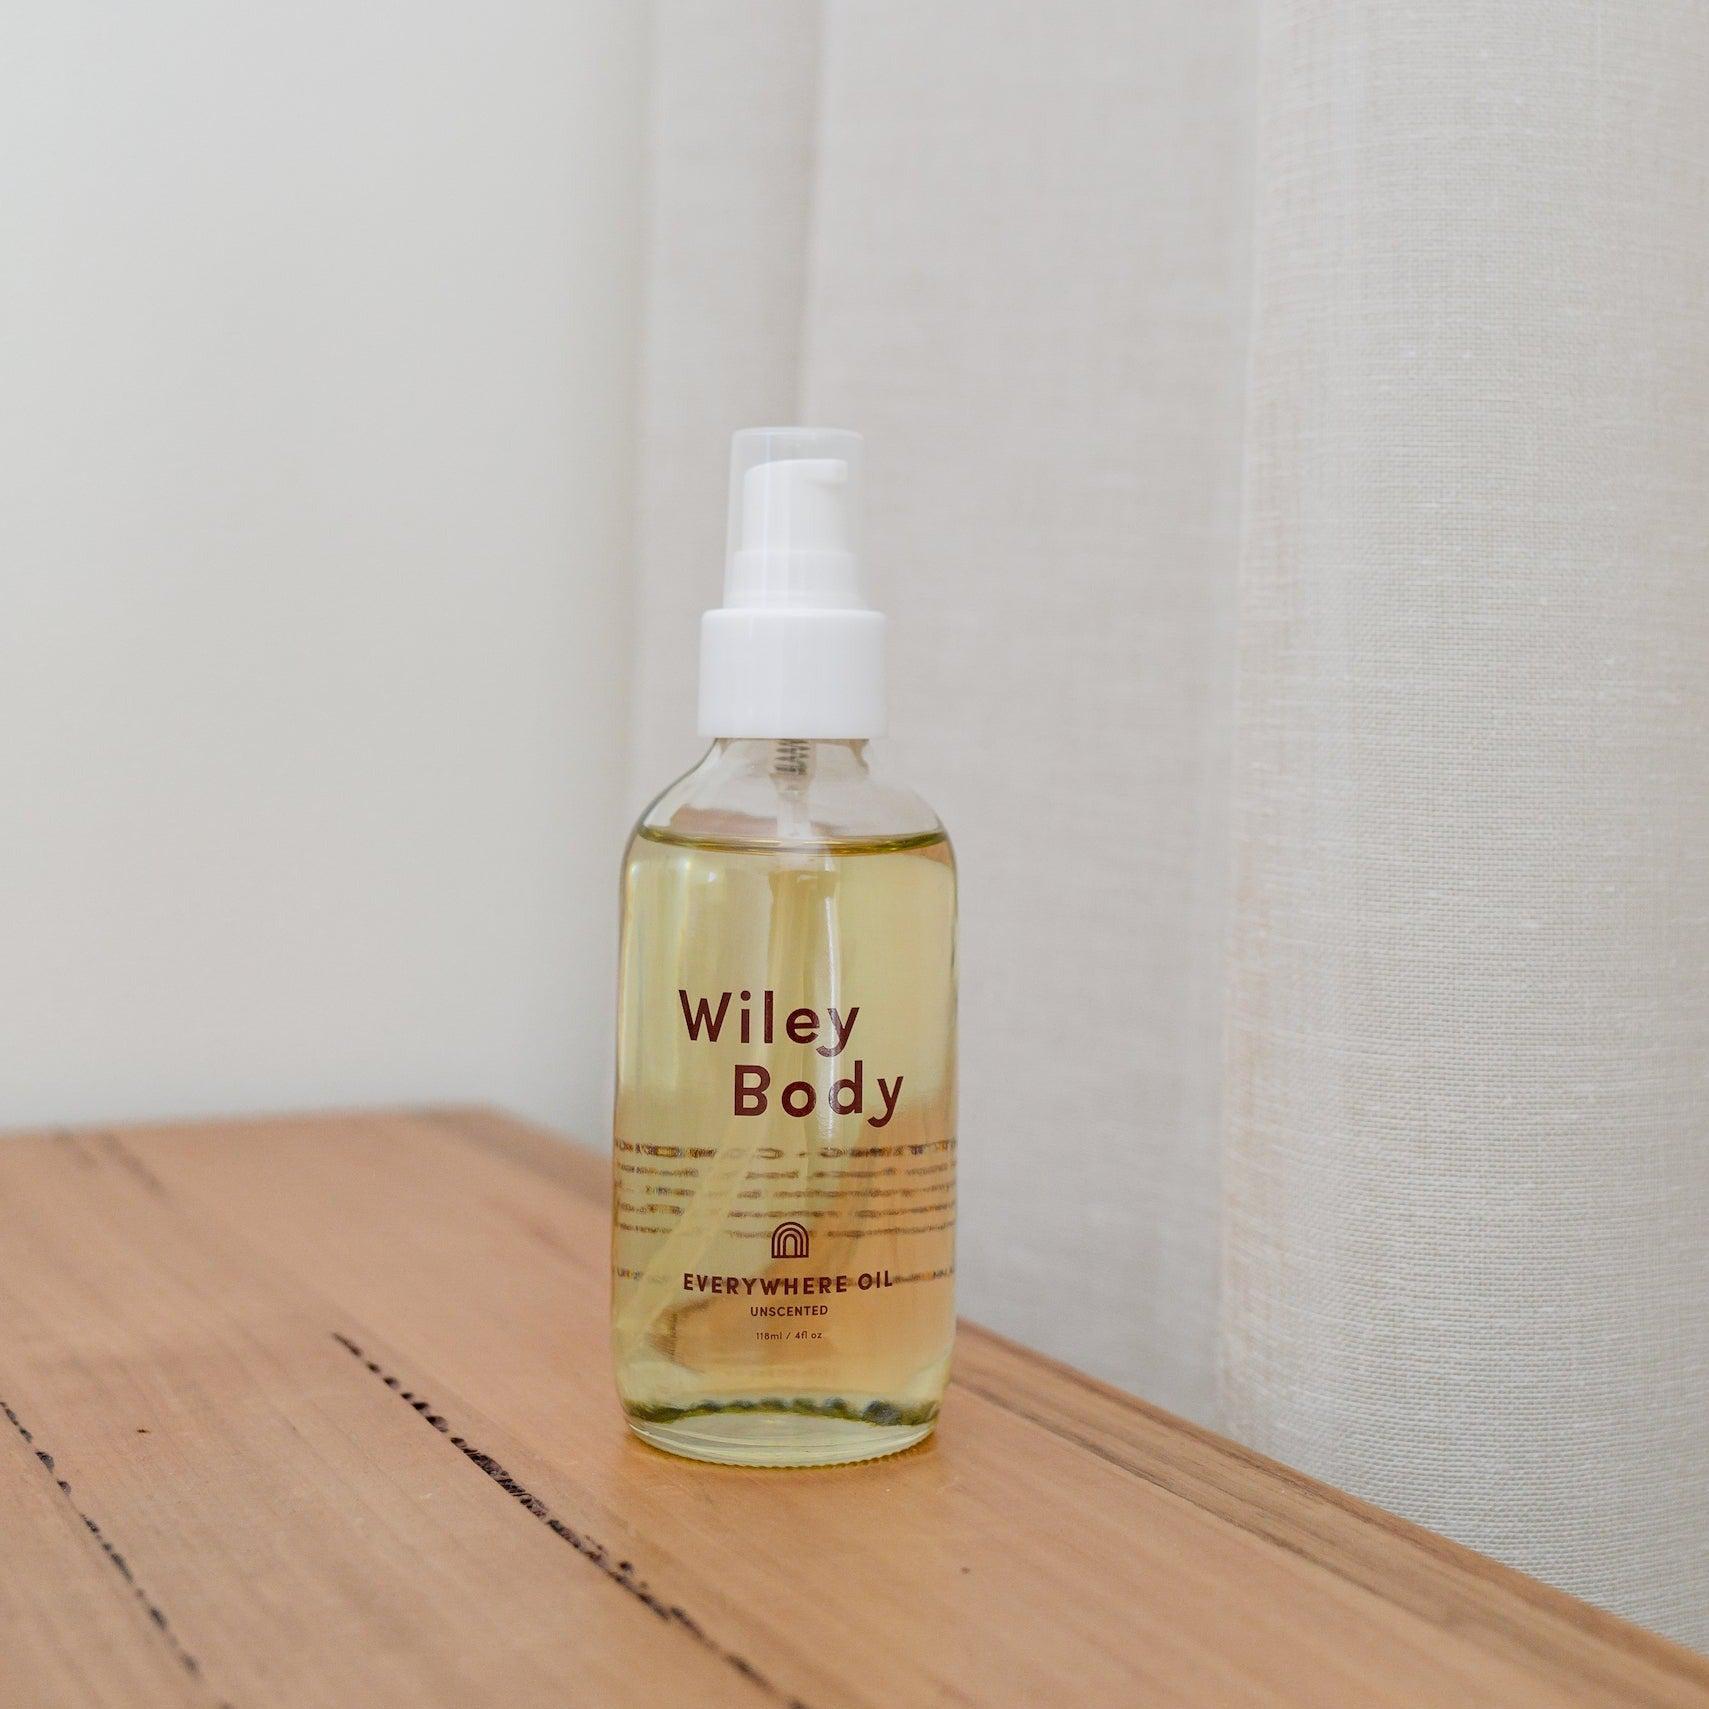 A nourishing bottle of Wiley Body everywhere oil sitting on a wooden table, ready to moisturize.